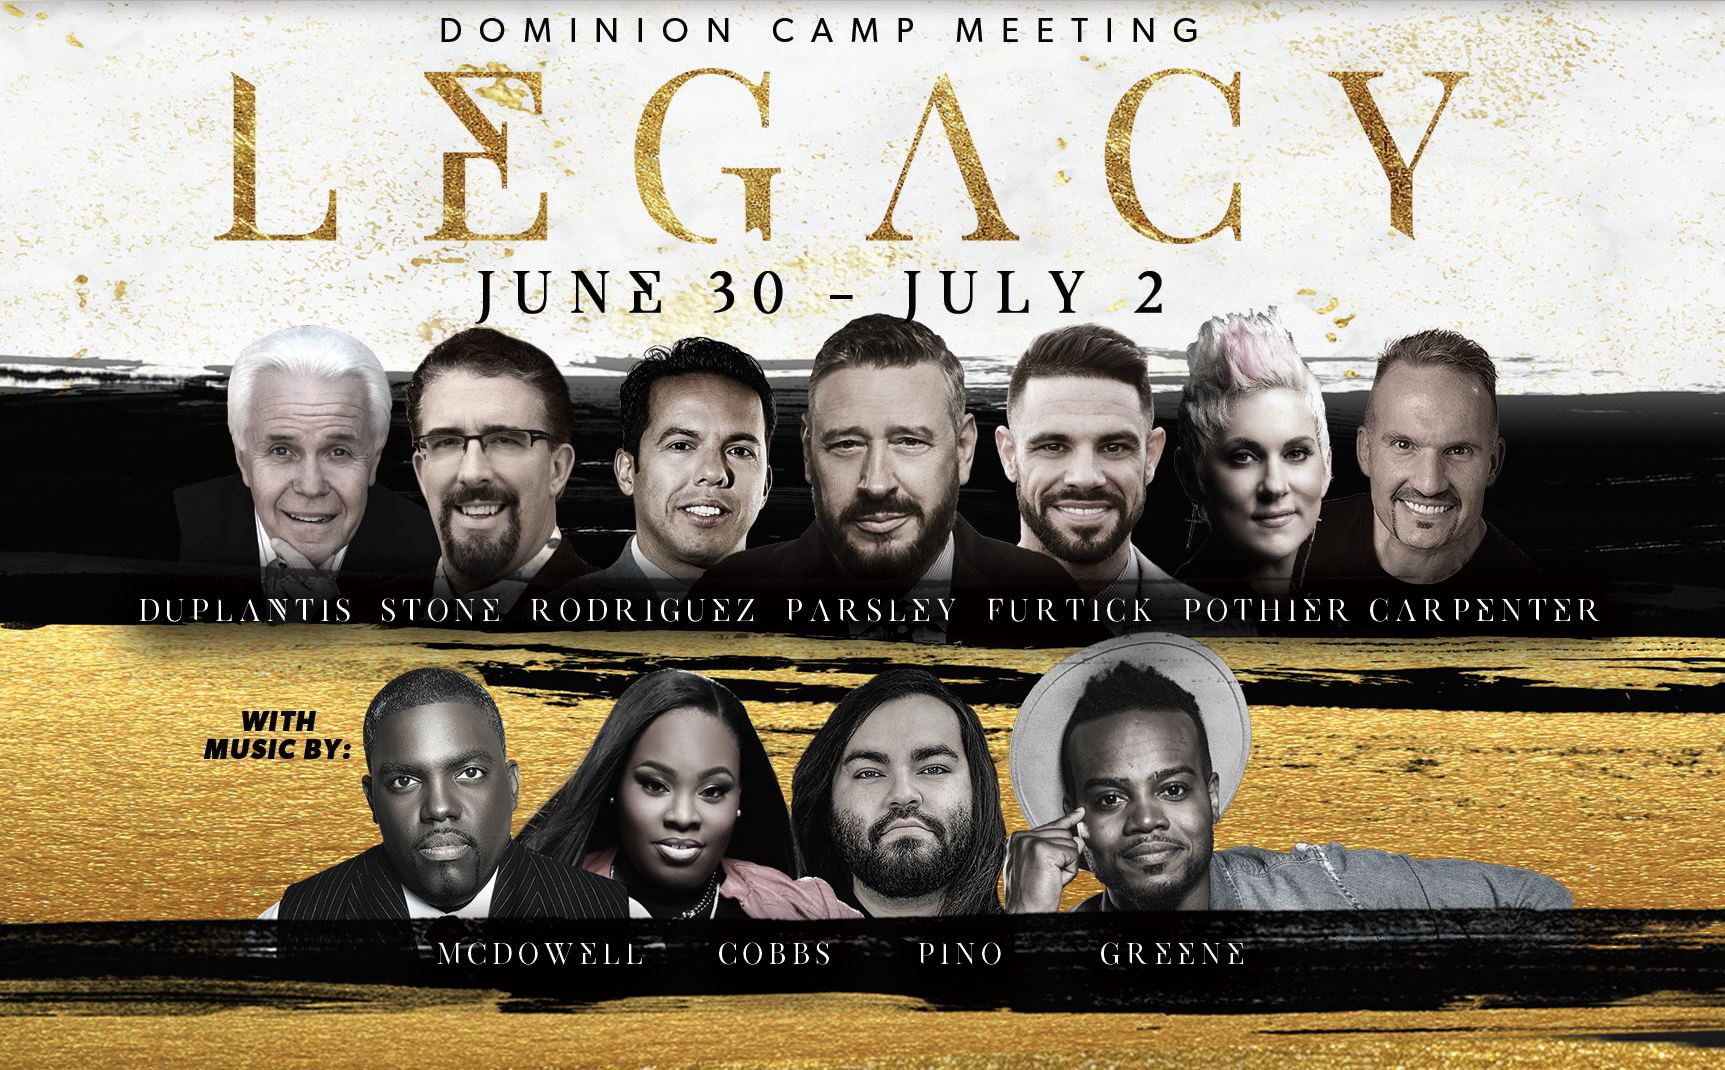 Dominion Camp Meeting  LEGACY | June 30 - July 2 | Duplantis, Stone, Rodriguez, Parsley, Furtick, Pothier, Carpenter | With music by: McDowell, Cobbs, Pino, Greene